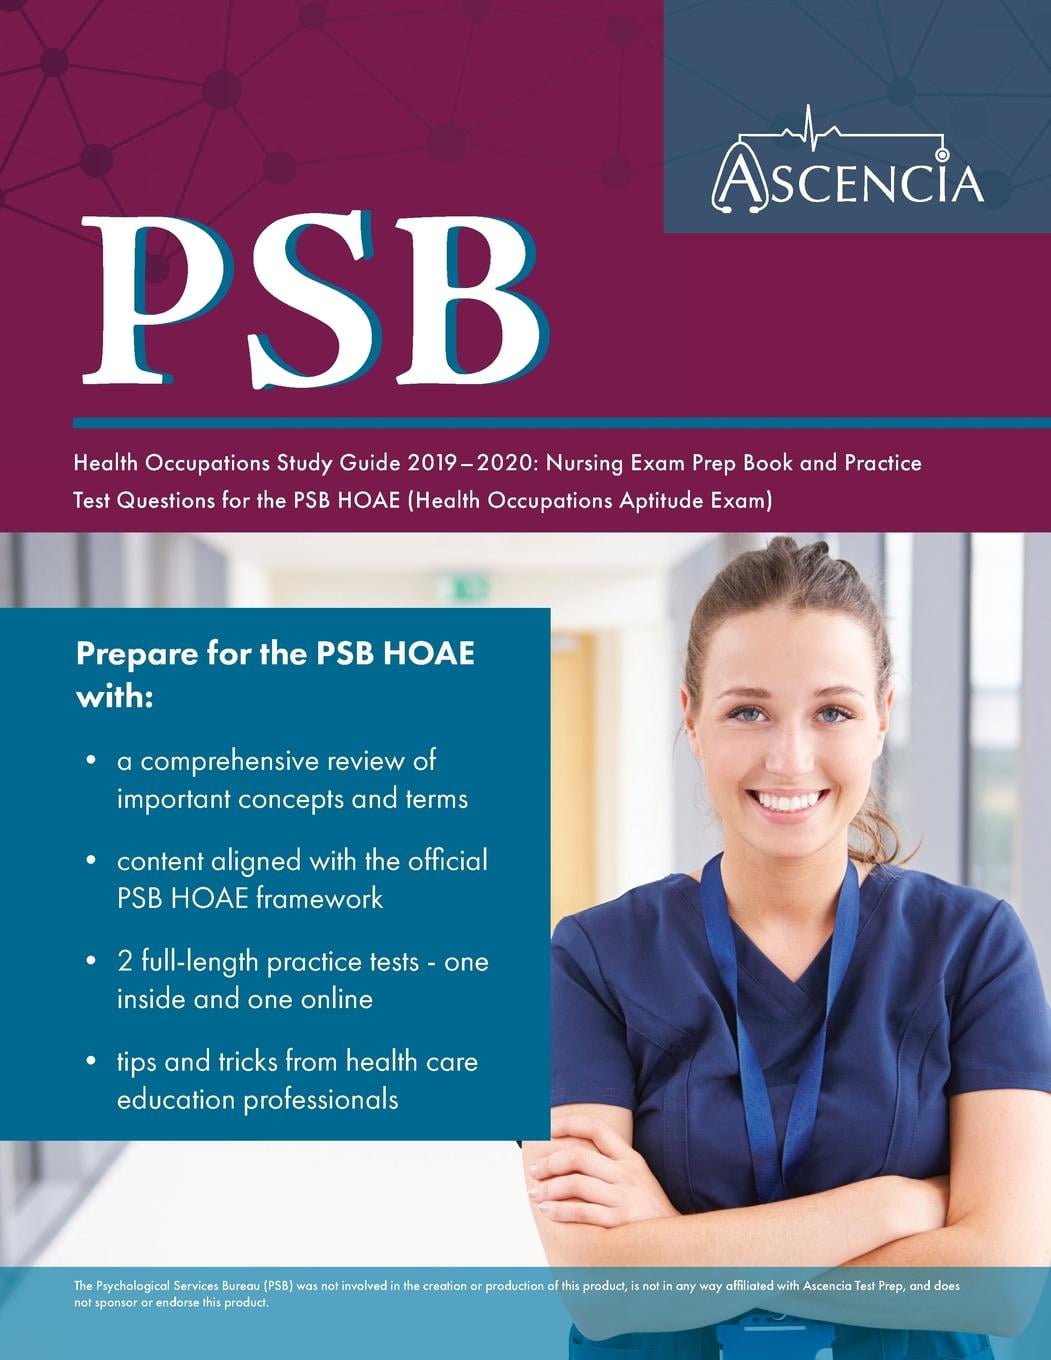 PSB Health Occupations Study Guide 2019 2020 Nursing Exam Prep Book And Practice Test